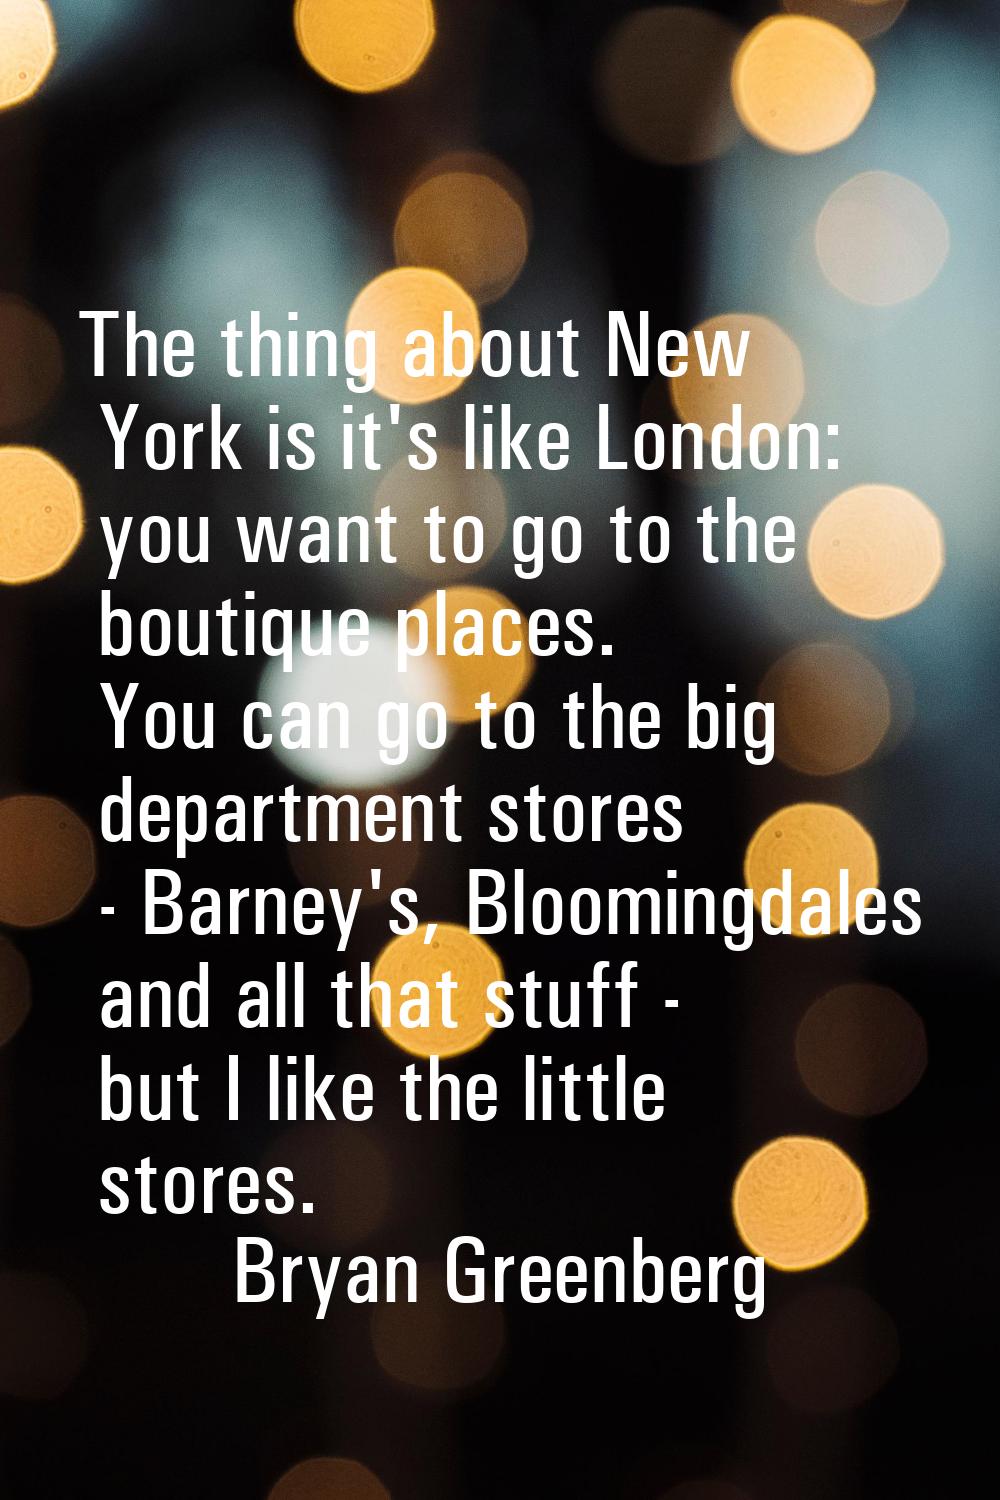 The thing about New York is it's like London: you want to go to the boutique places. You can go to 